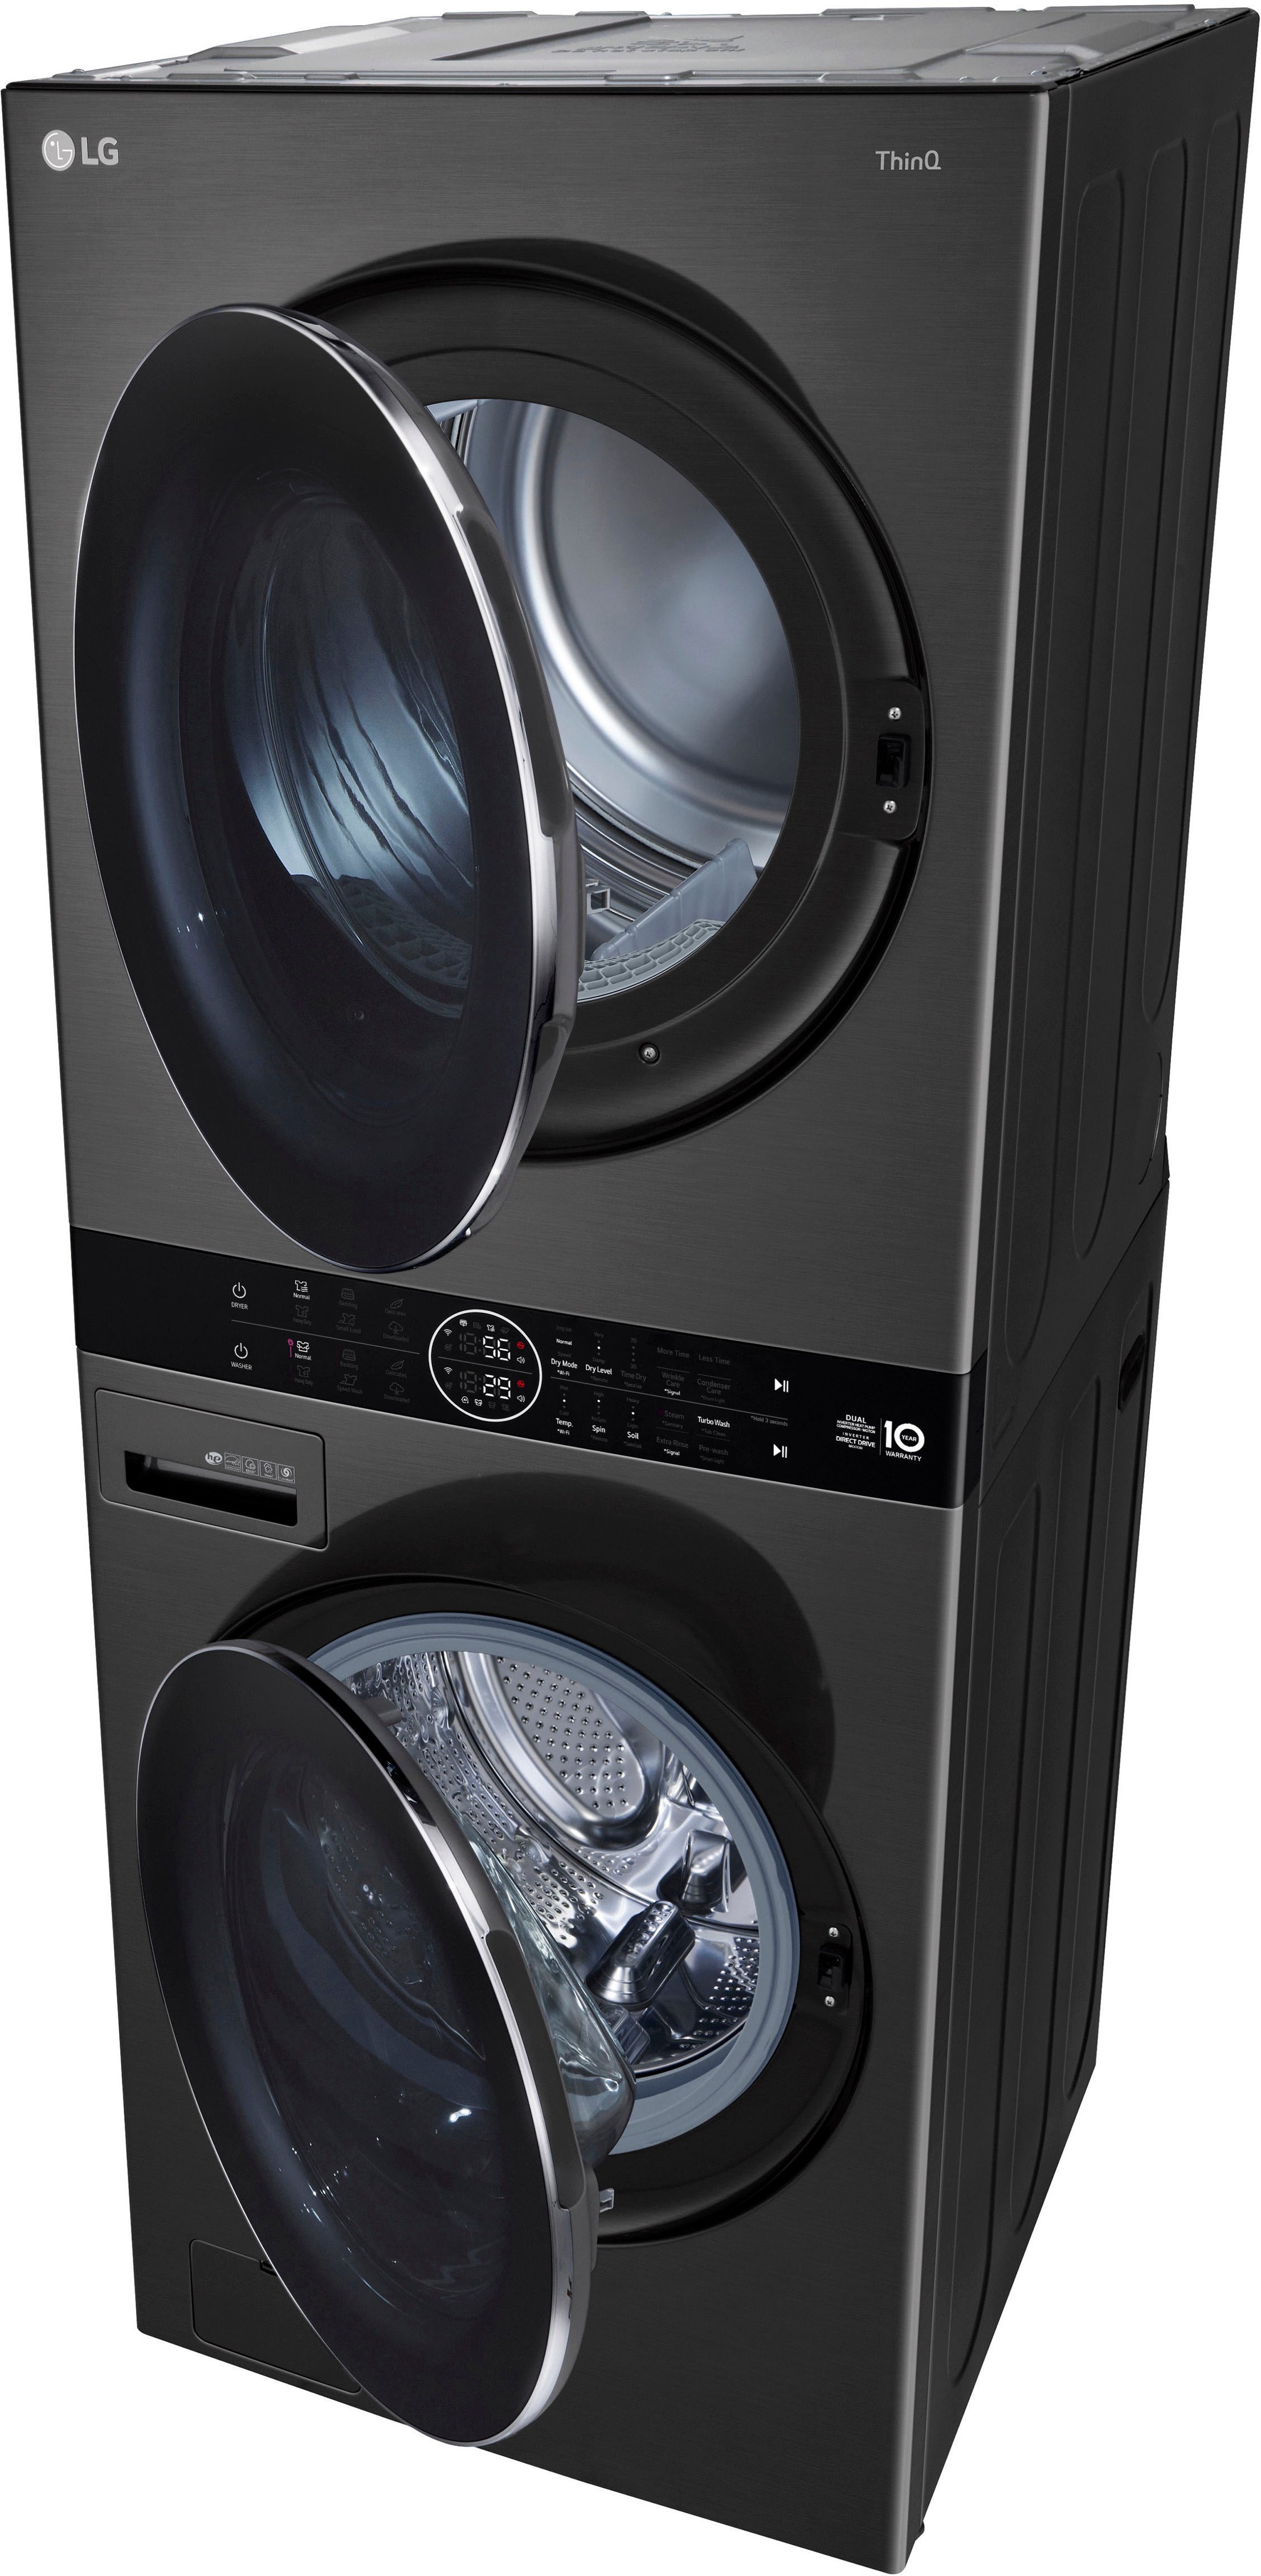 Buy Cu. Washer Dryer Smart HE Ventless WKHC202HBA and Black Electric Steam Front Steel WashTower 4.5 Load Cu. 7.4 with Ft. LG and - Dryer Best Ft.